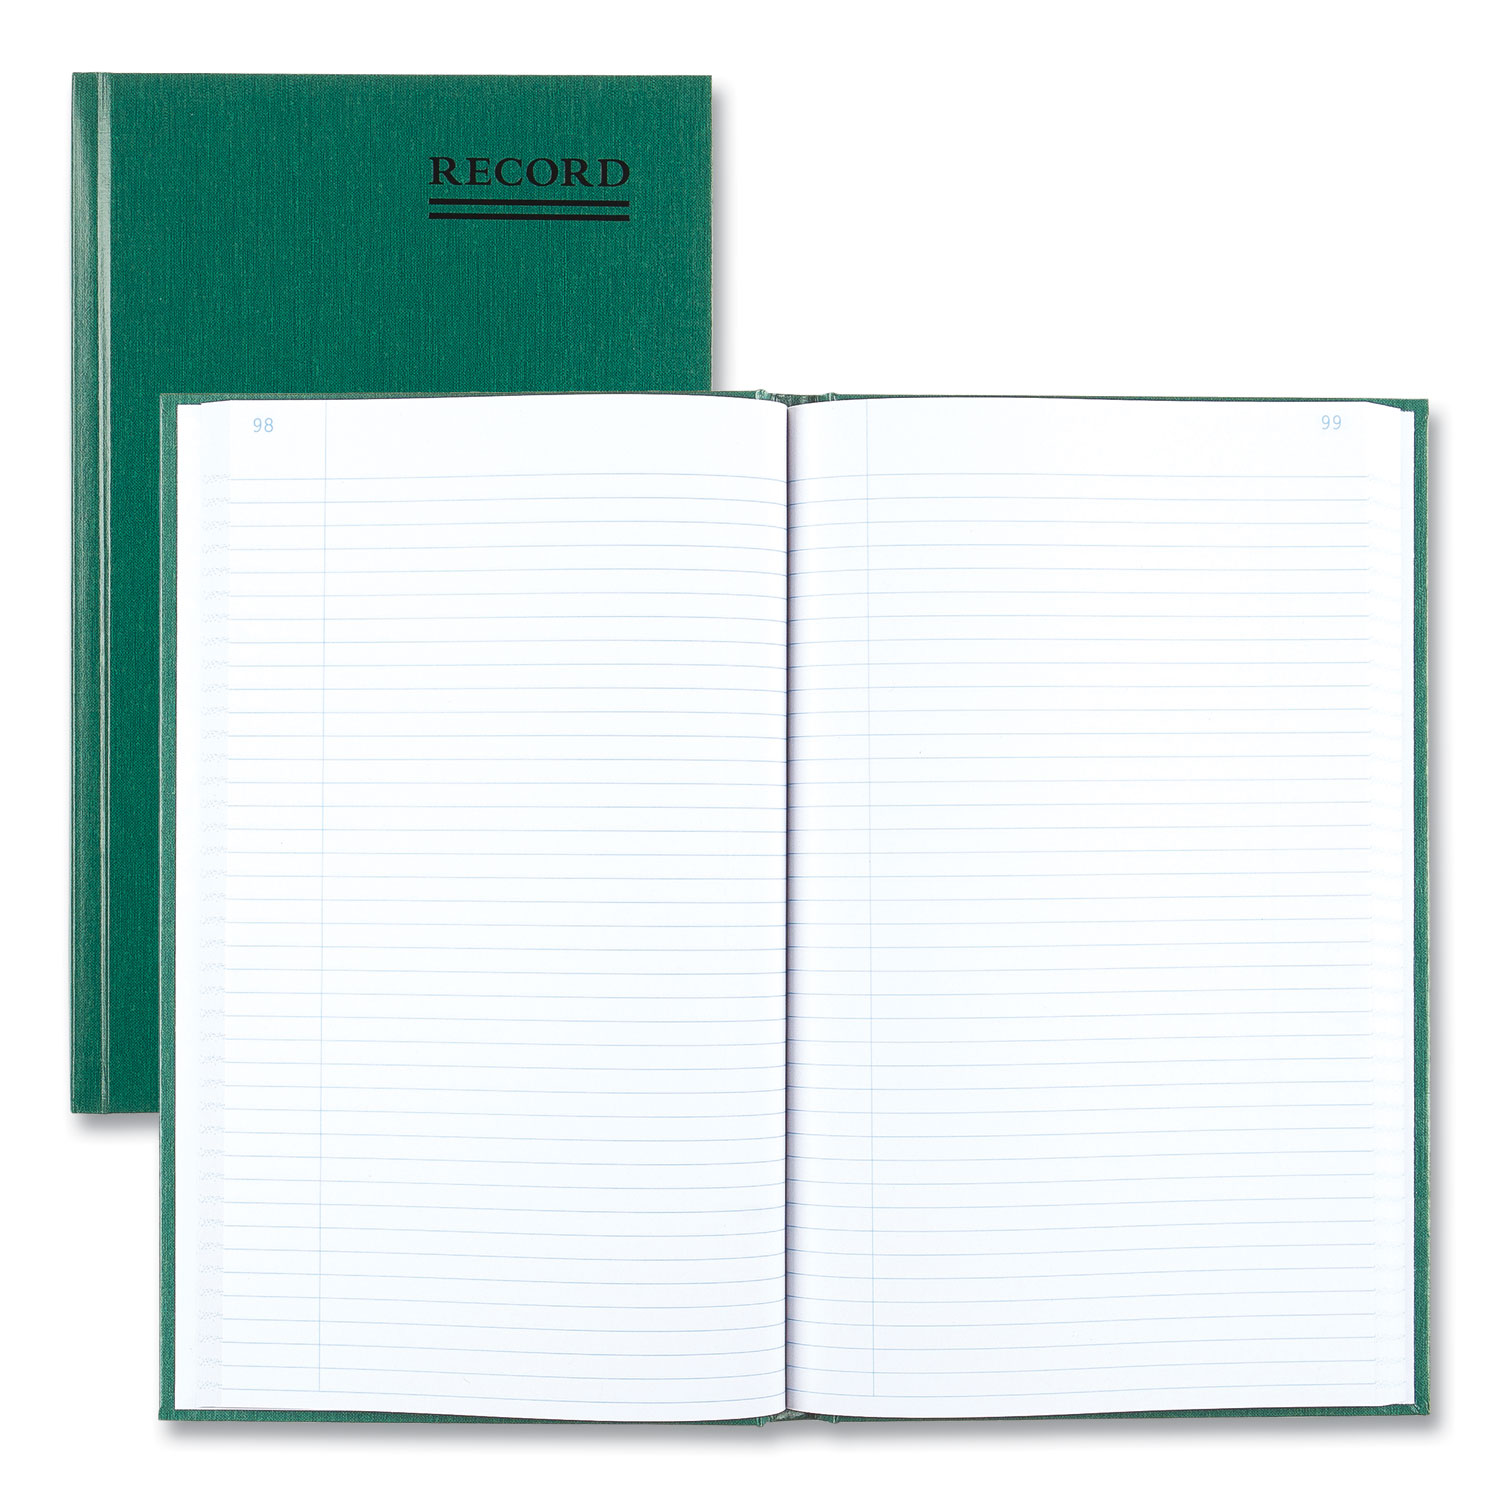 National® Emerald Series Account Book, Green Cover, 12.25 x 7.25 Sheets,  500 Sheets/Book Quipply